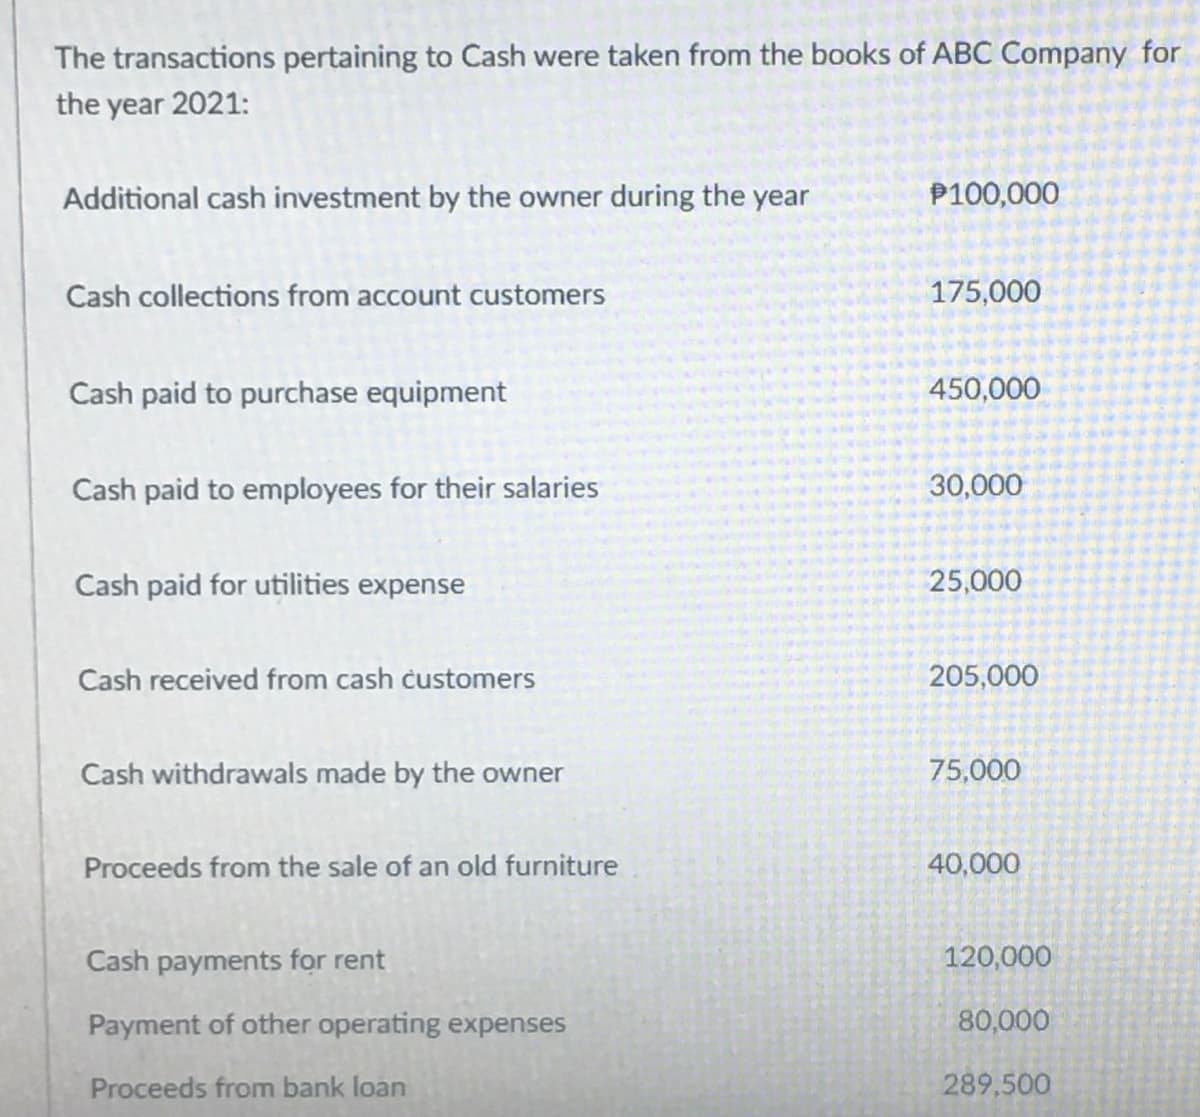 The transactions pertaining to Cash were taken from the books of ABC Company for
the year 2021:
Additional cash investment by the owner during the year
P100,000
Cash collections from account customers
175,000
Cash paid to purchase equipment
450,000
Cash paid to employees for their salaries
30,000
Cash paid for utilities expense
25,000
Cash received from cash customers
205,000
Cash withdrawals made by the owner
75,000
Proceeds from the sale of an old furniture
40,000
Cash payments for rent
120,000
Payment of other operating expenses
80,000
Proceeds from bank loan
289,500
